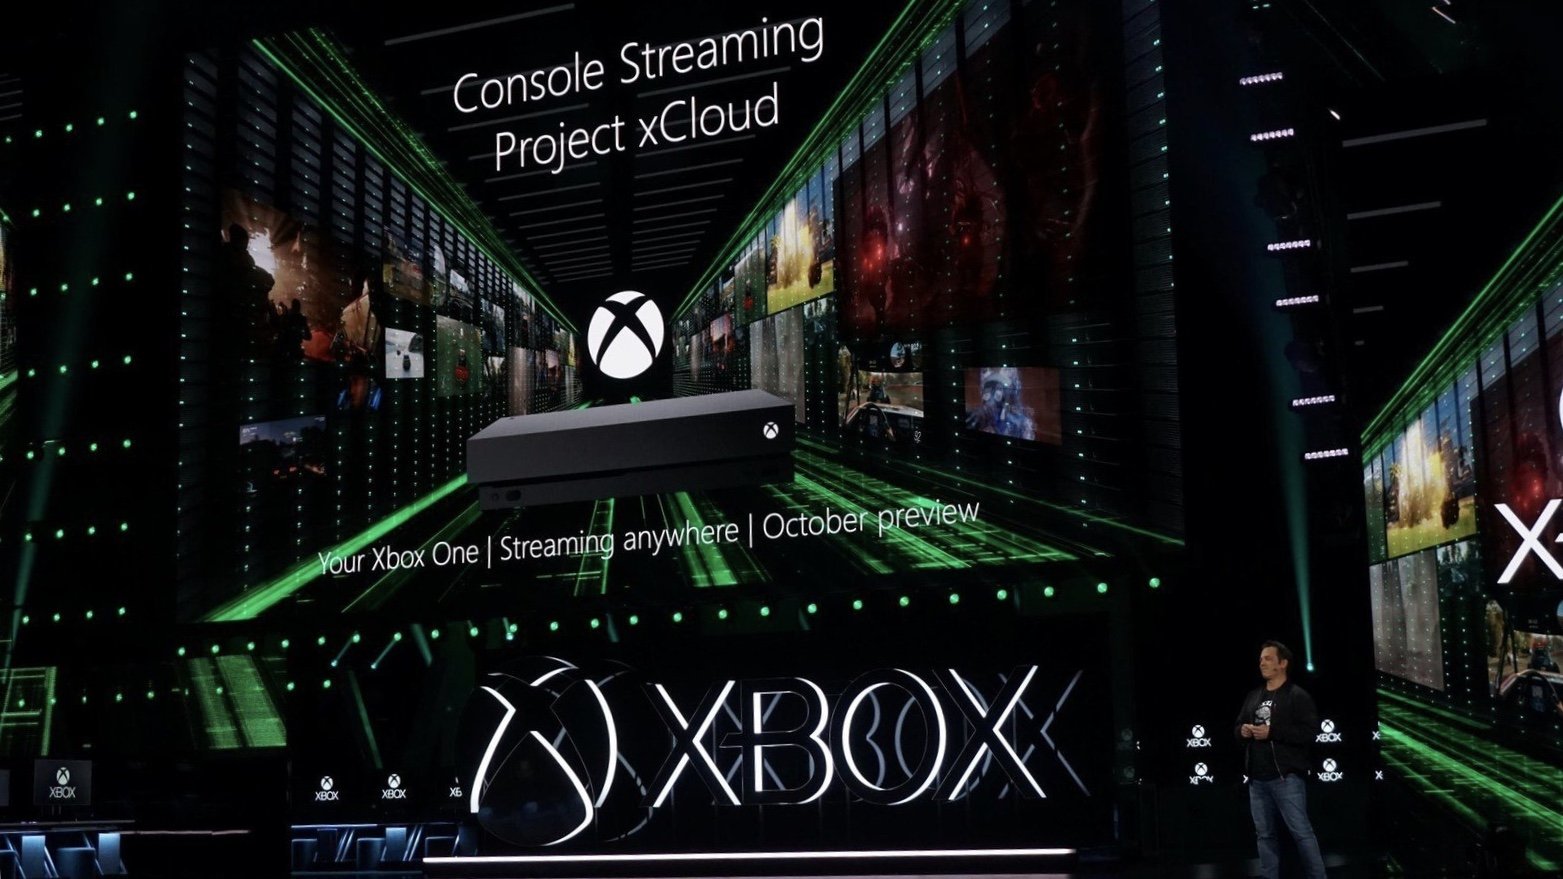 xbox e32019 briefing project x cloud